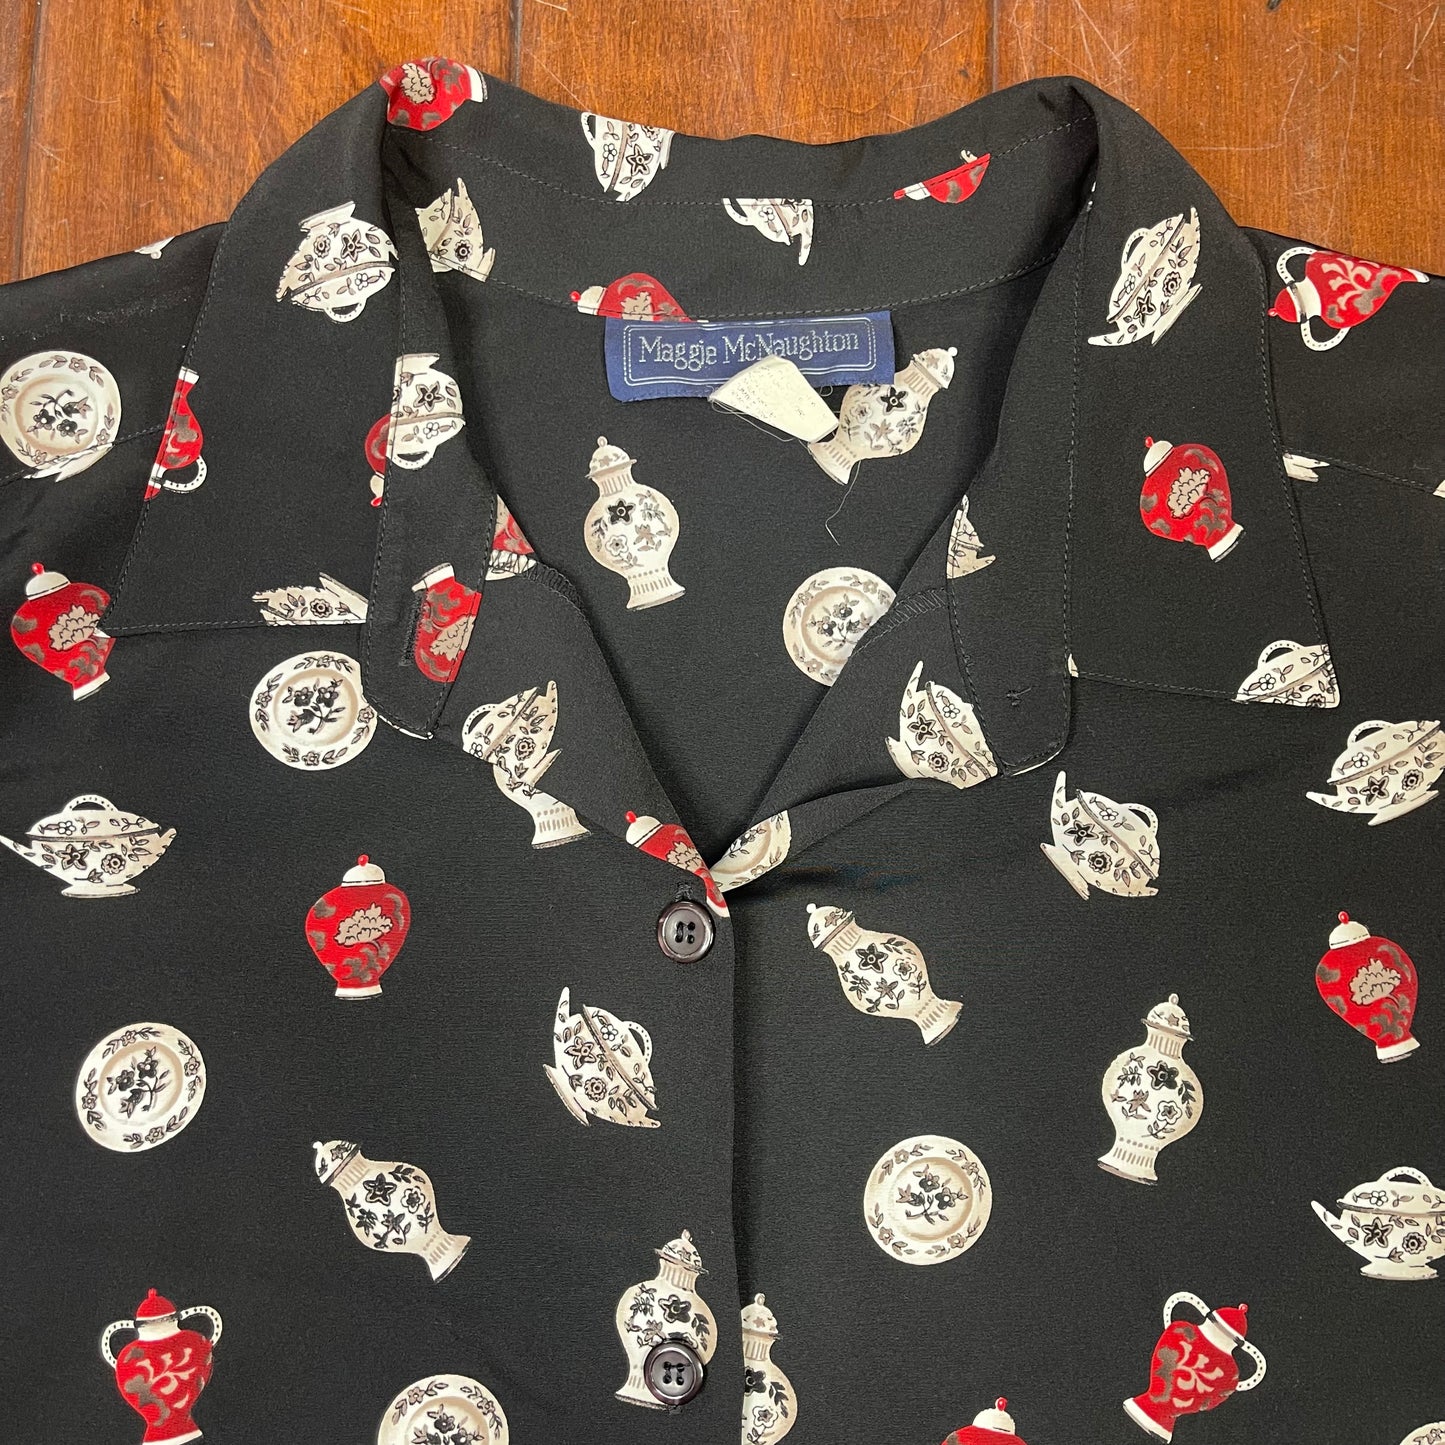 VINTAGE FINE CHINA BUTTON-UP